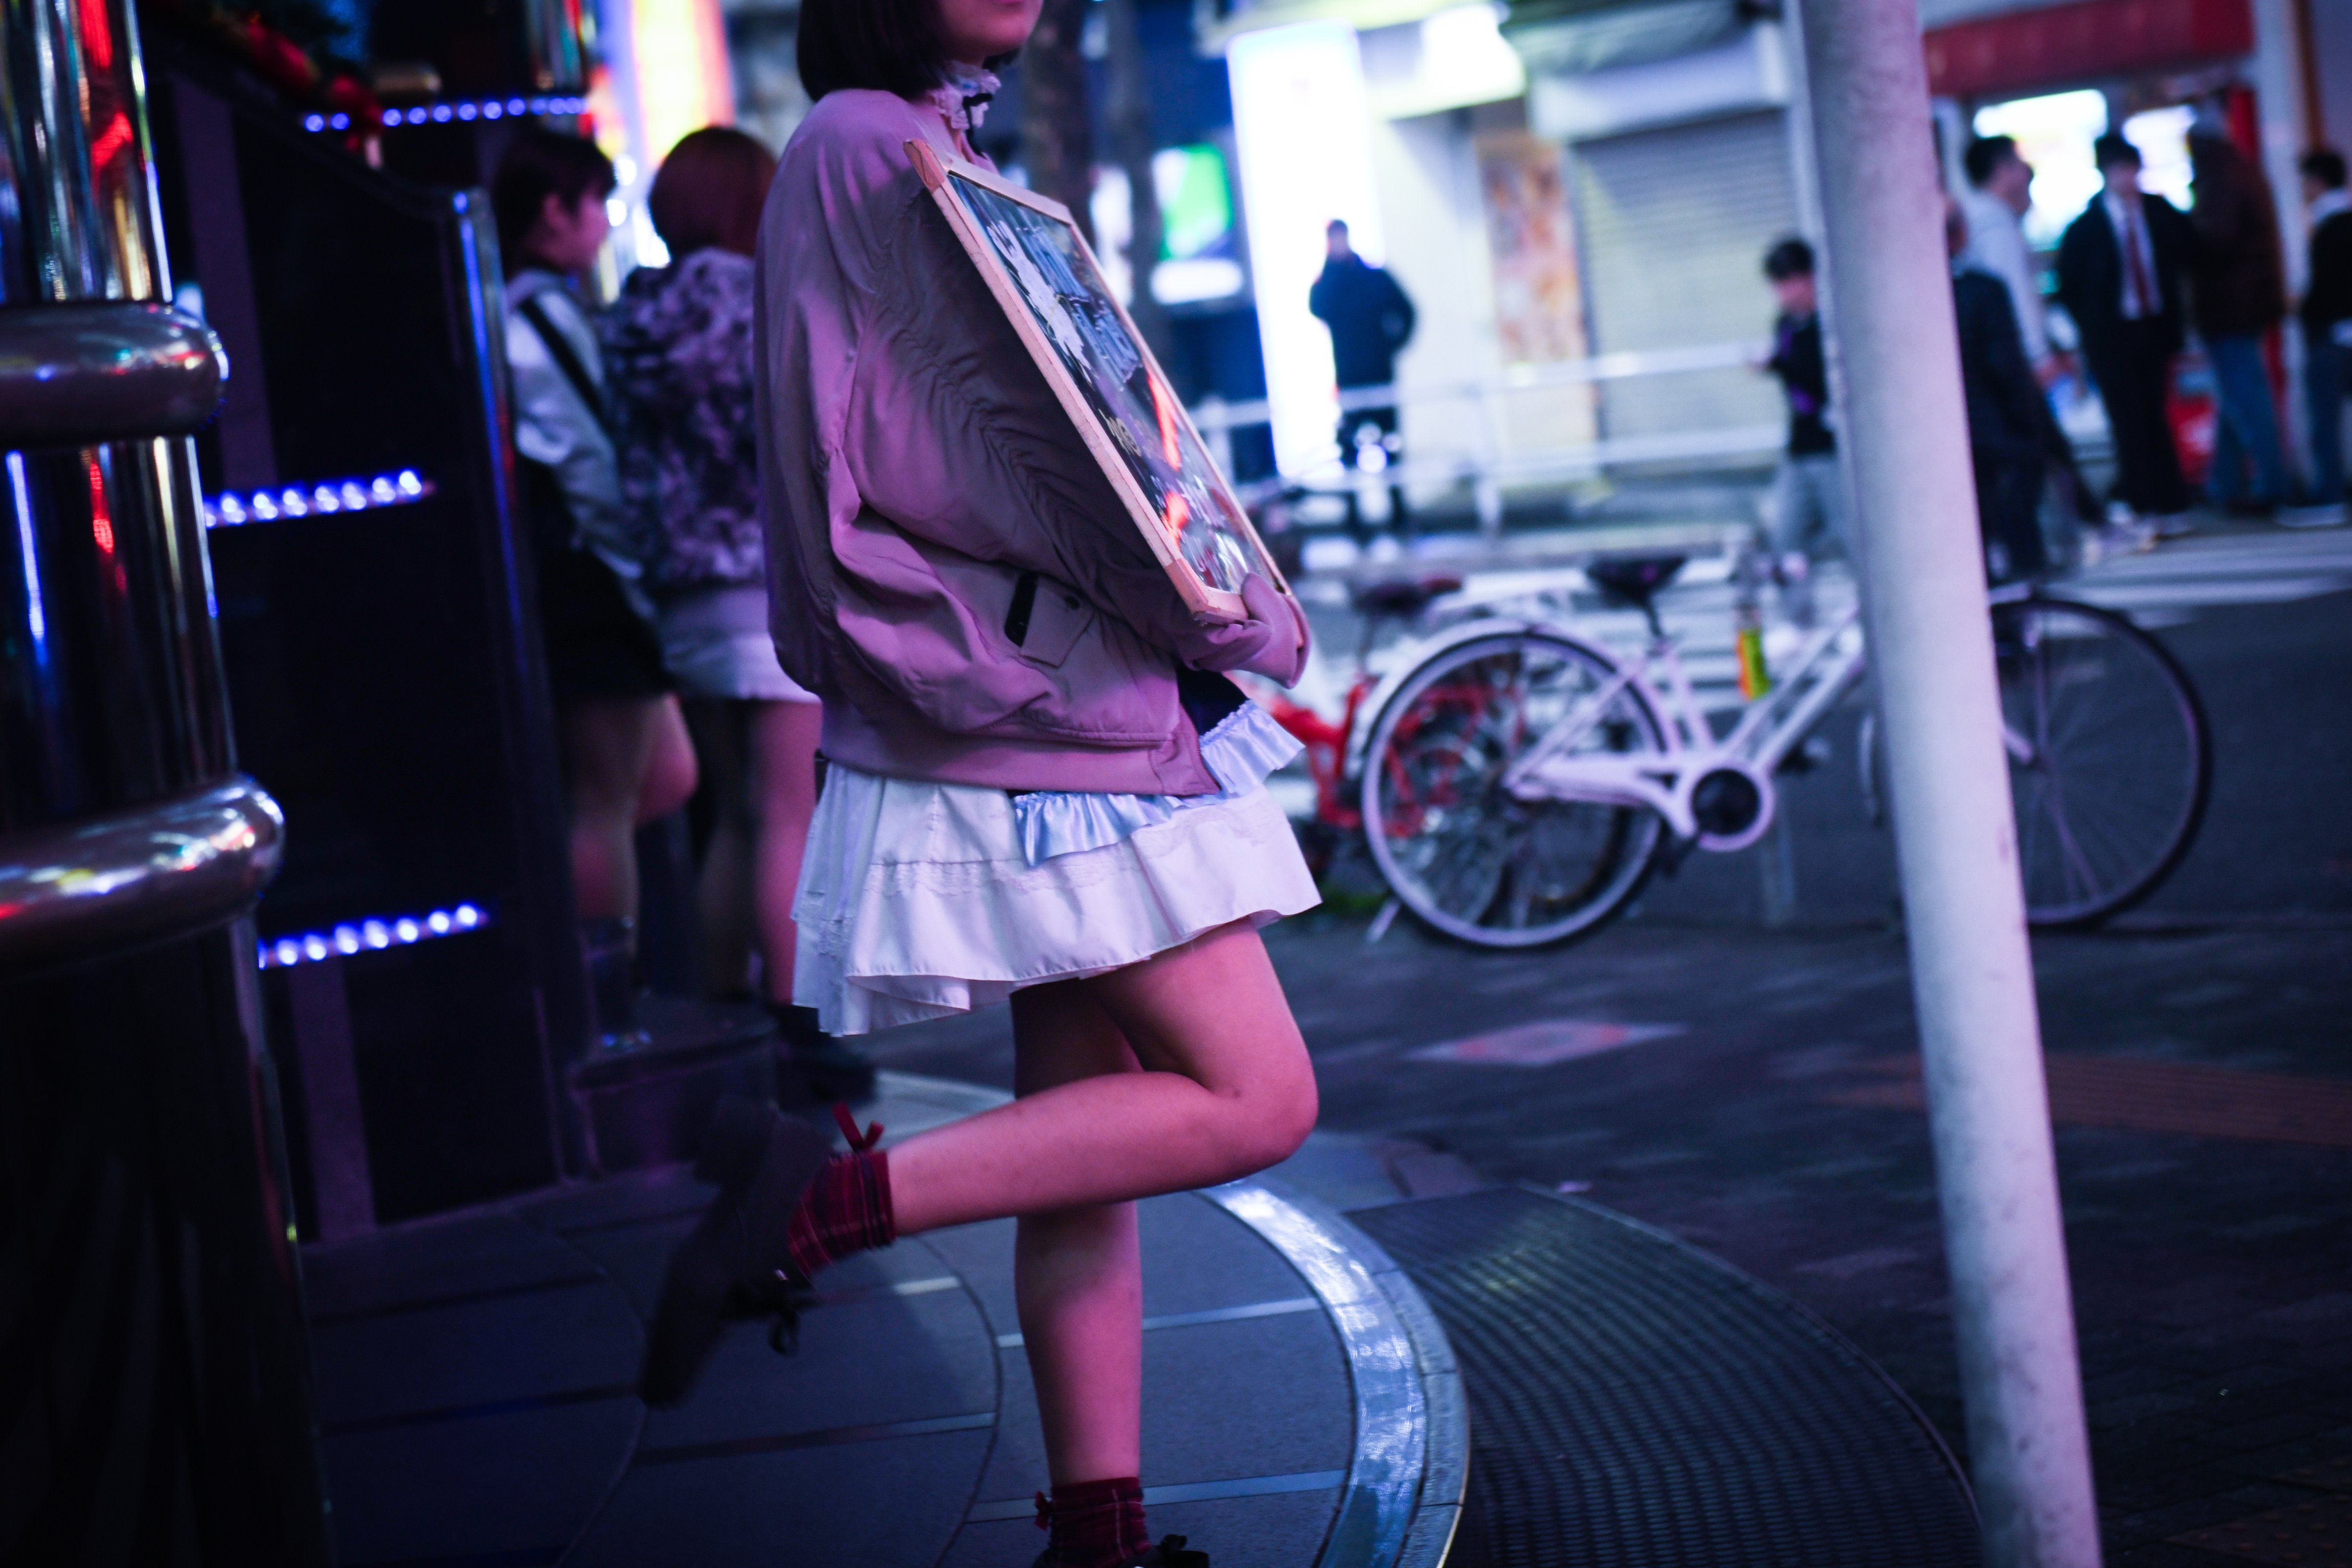 A woman holds an advertisement for a girls bar in the Shinjuku district of Tokyo, Japan, on Wednesday, July 21, 2018. (Noriko Hayashi/Bloomberg via Getty Images)